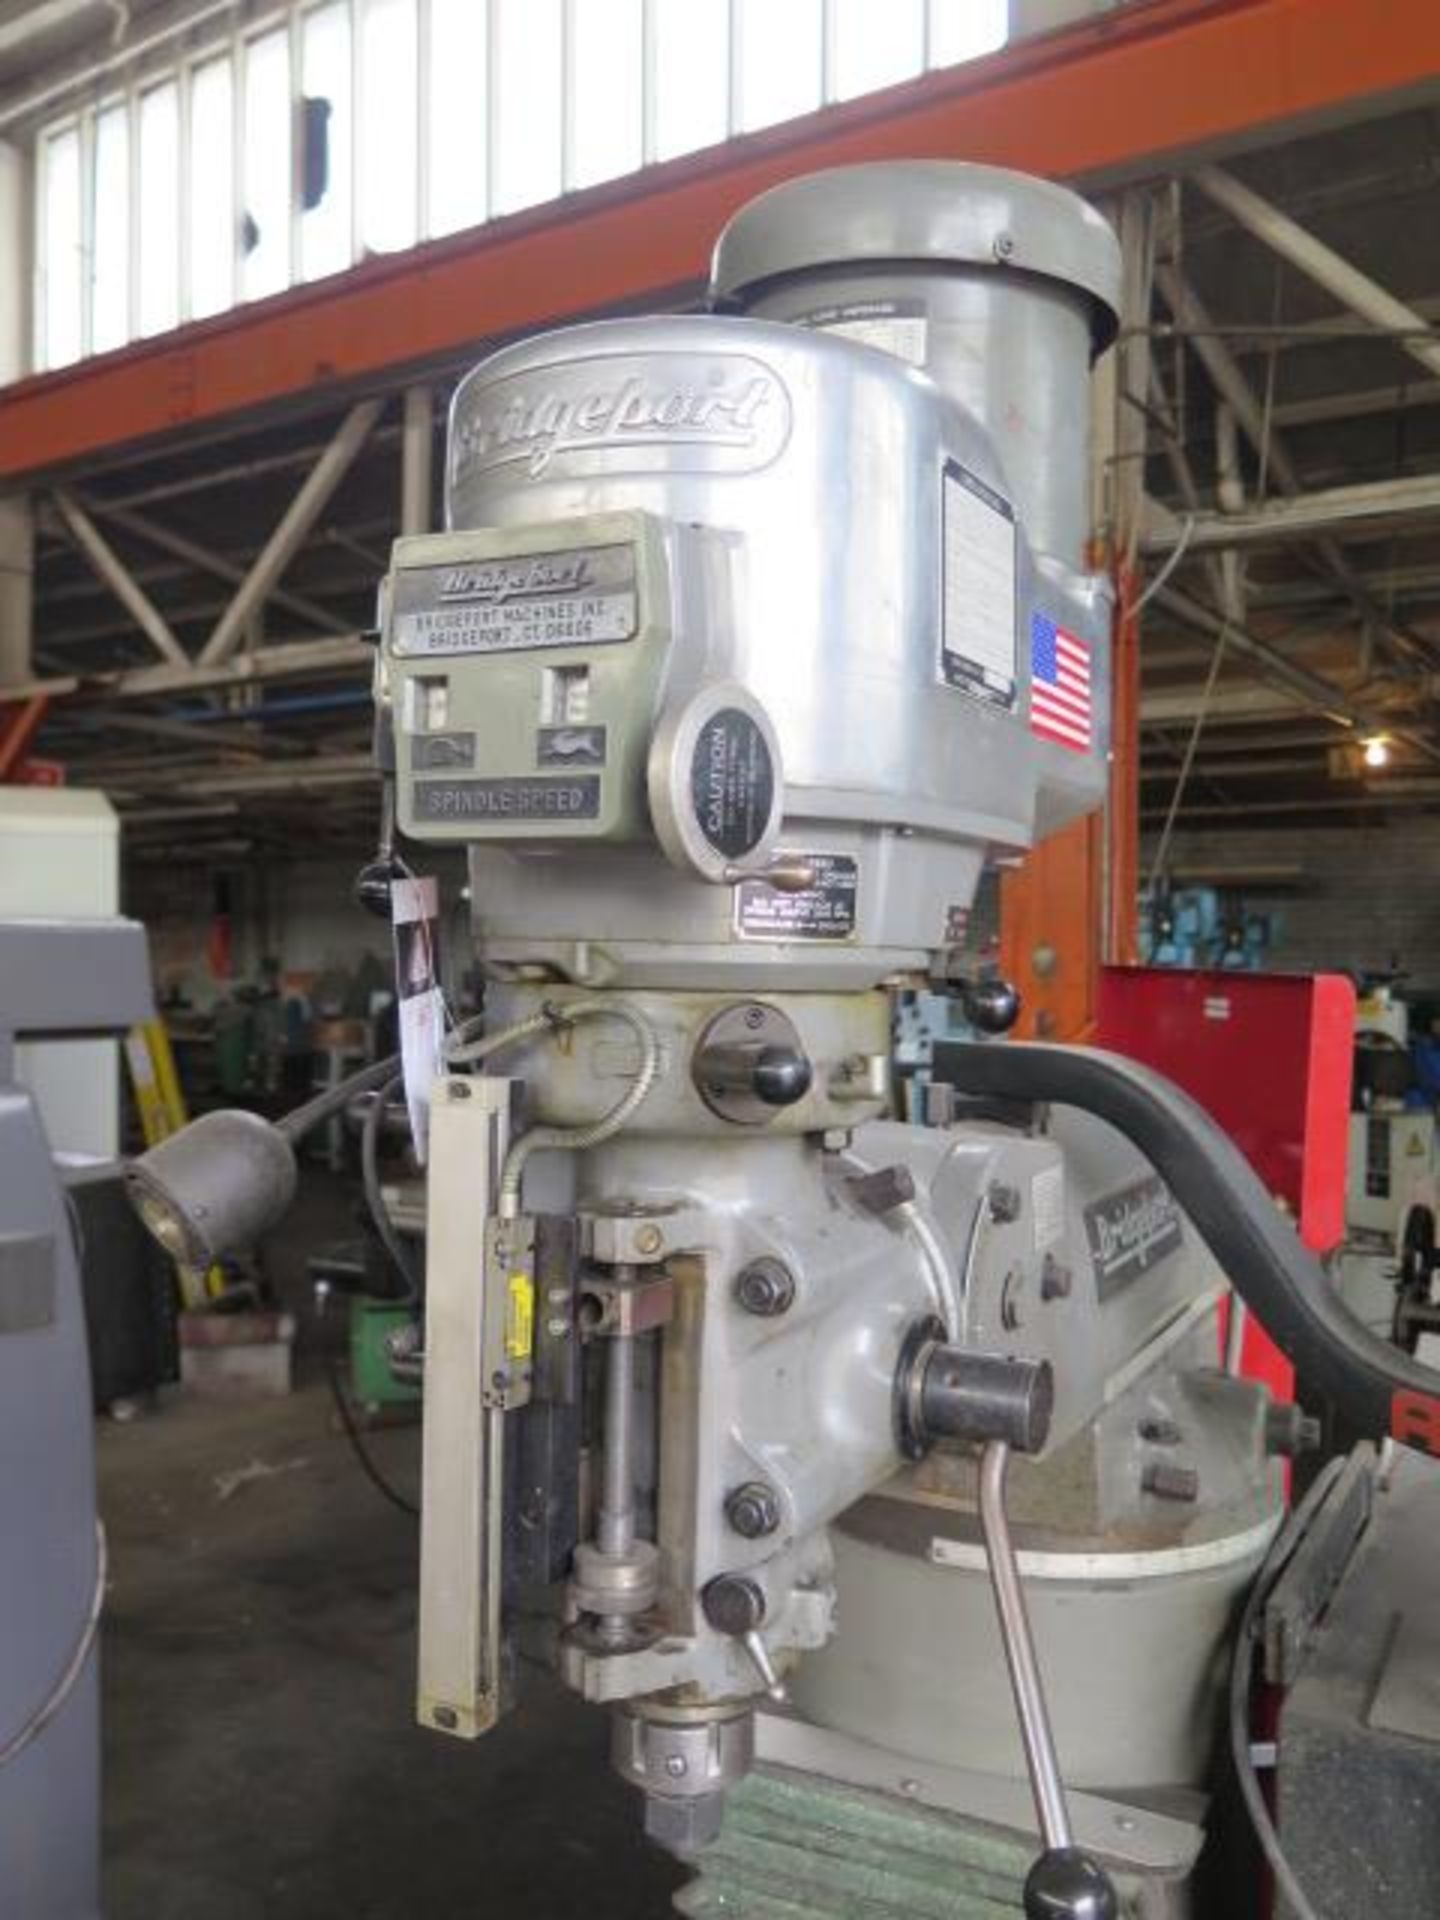 Bridgeport 2-Axis CNC Vertical Mill s/n 260347 w/ Anilam 3000M Controls, 2Hp Motor, SOLD AS IS - Image 4 of 10